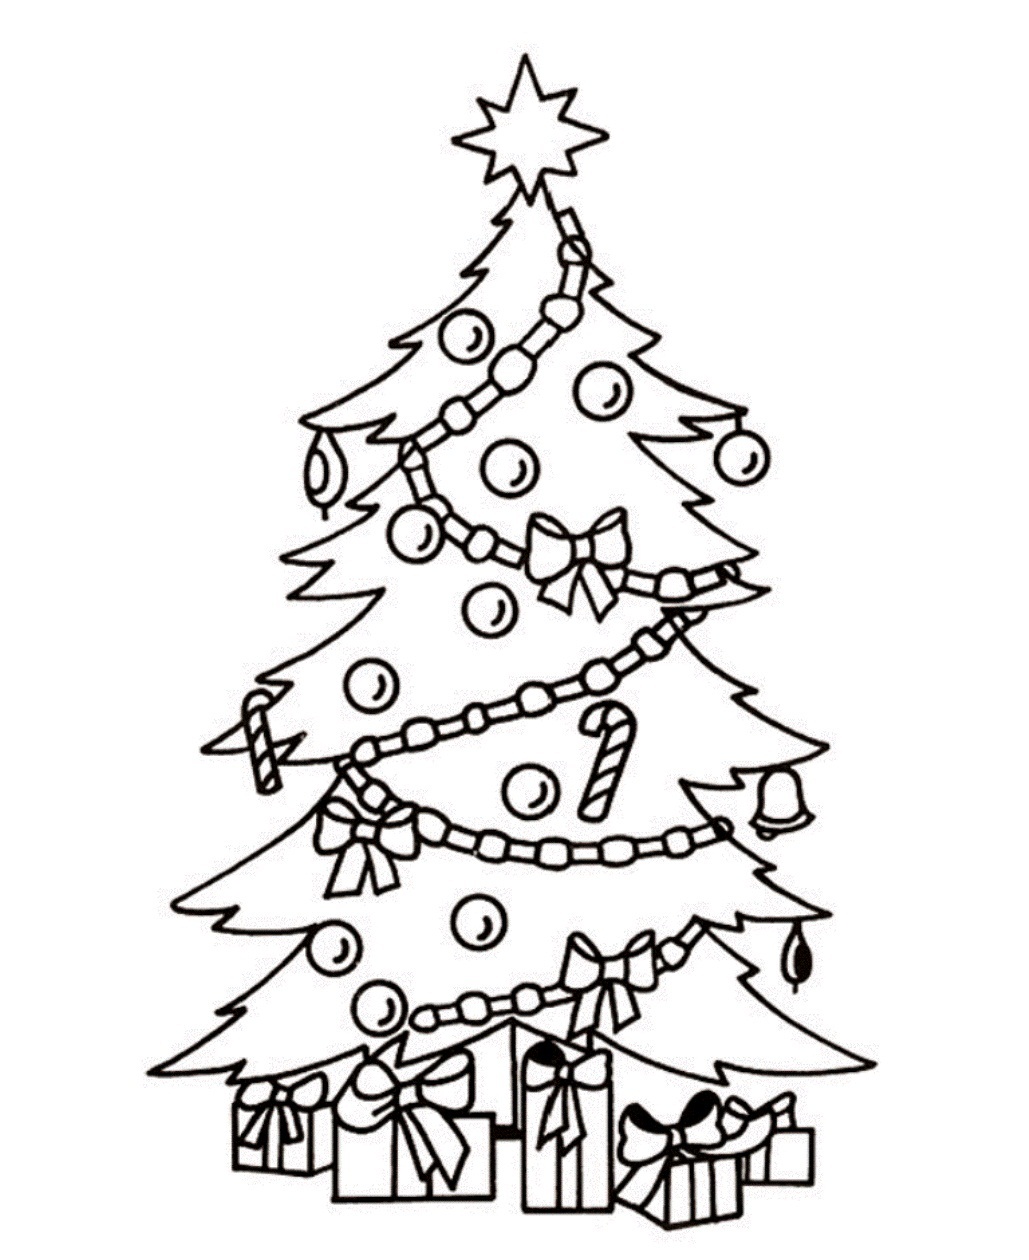 Printable Christmas Tree Coloring Pages  Coloring Me